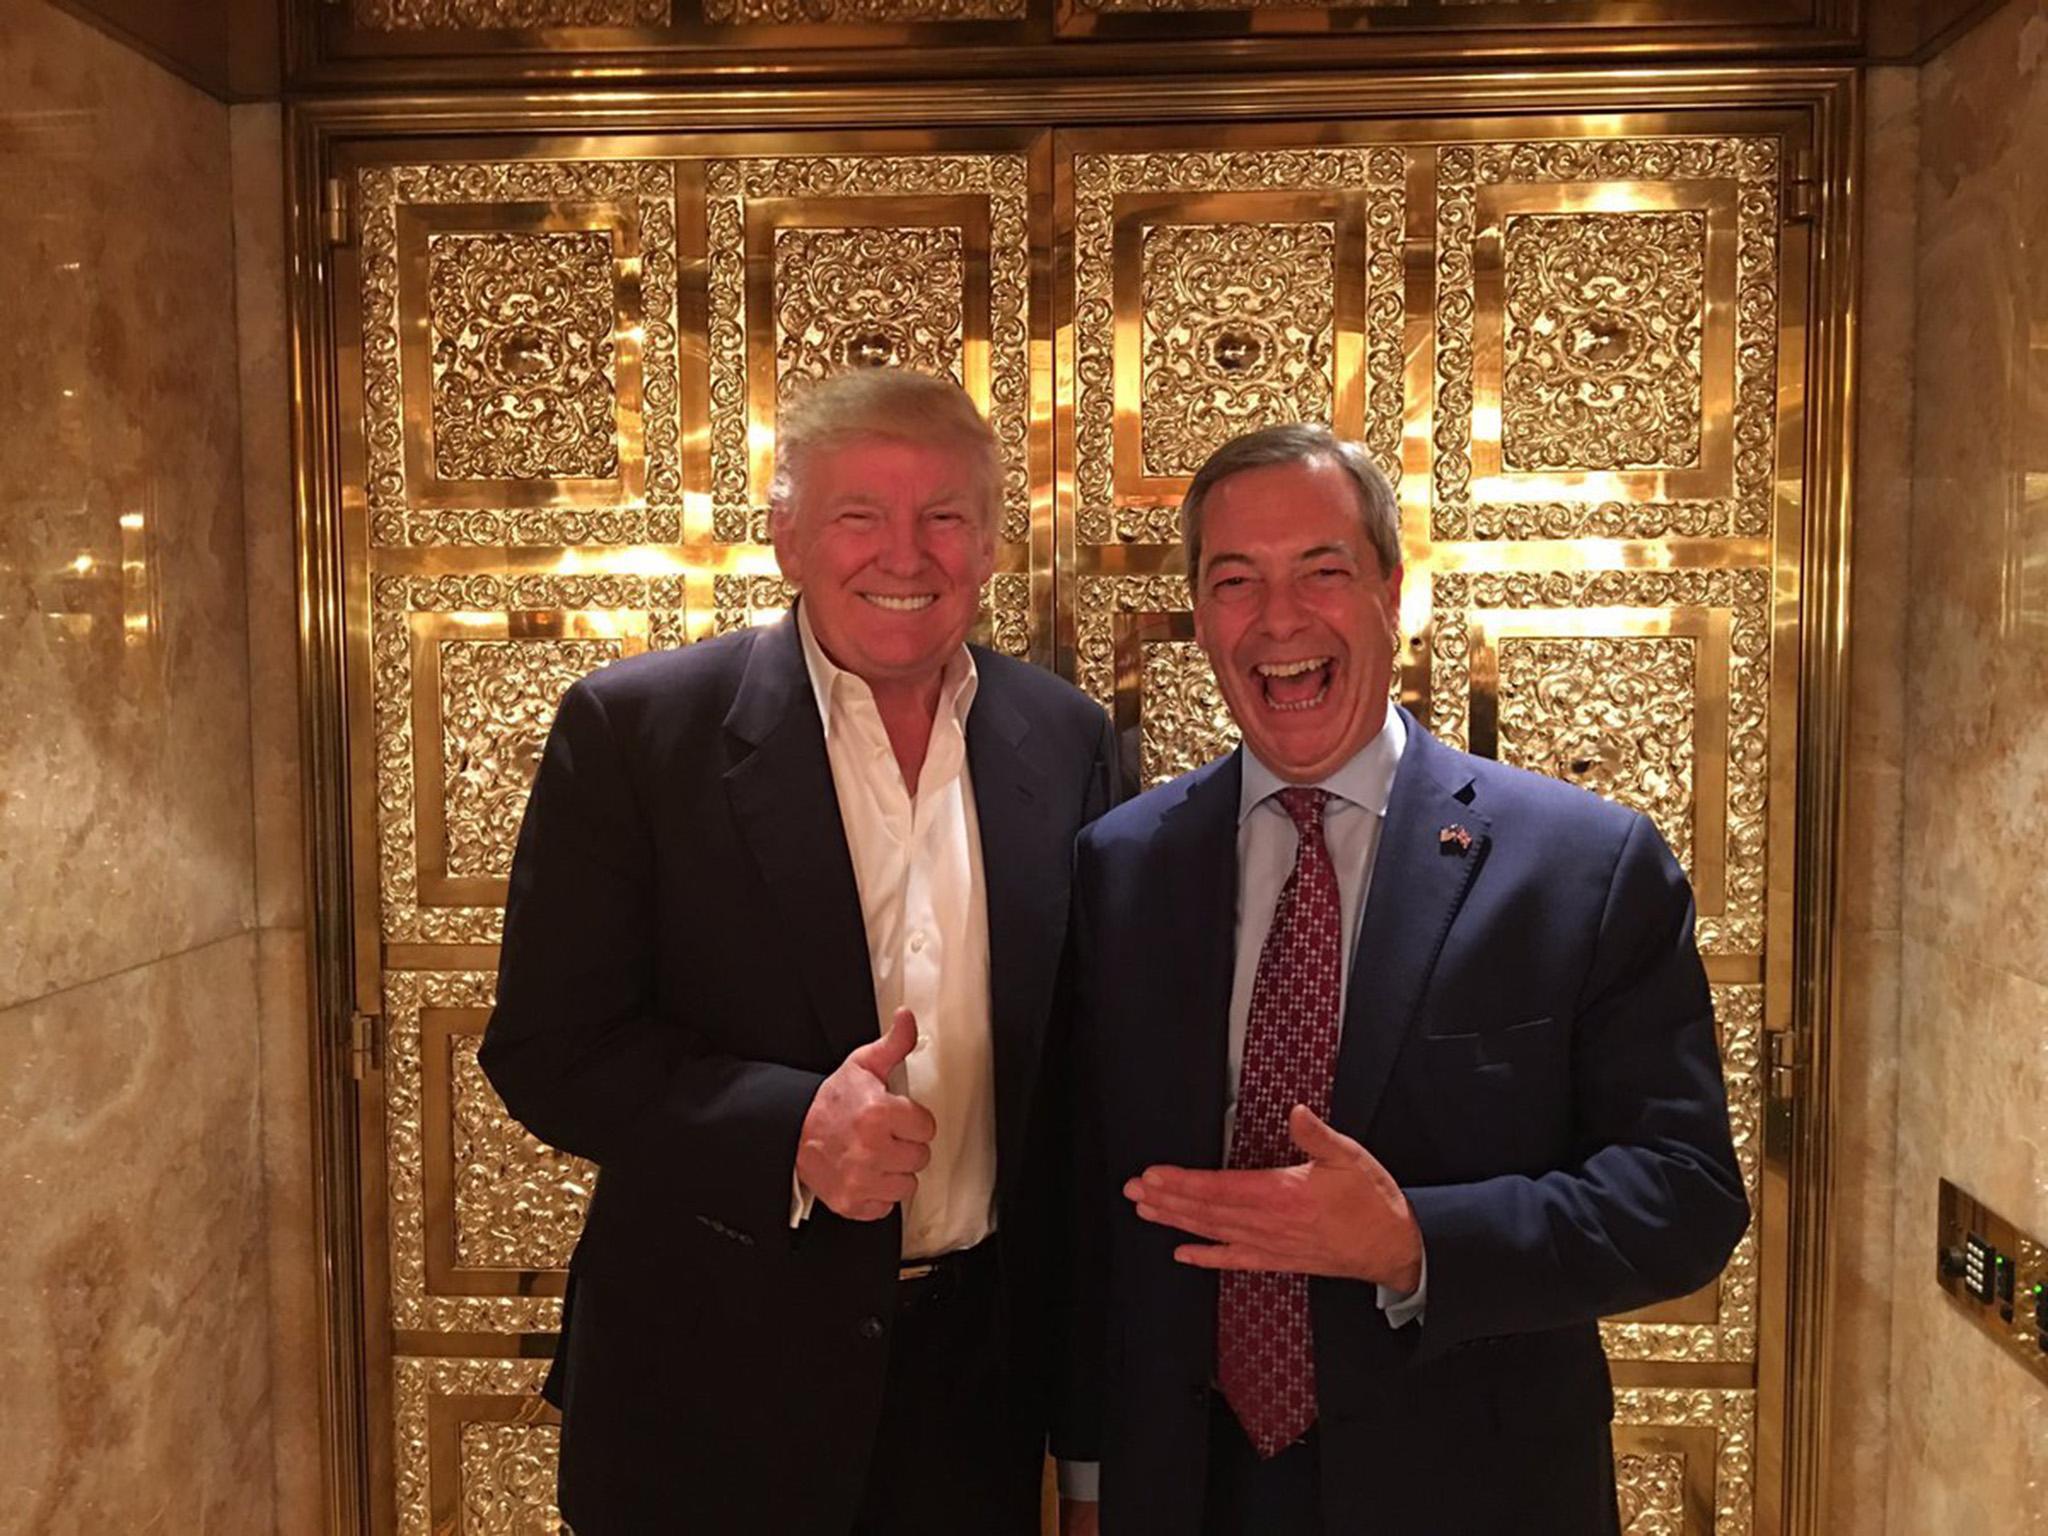 Donald Trump and Nigel Farage meet at Trump Tower in New York City